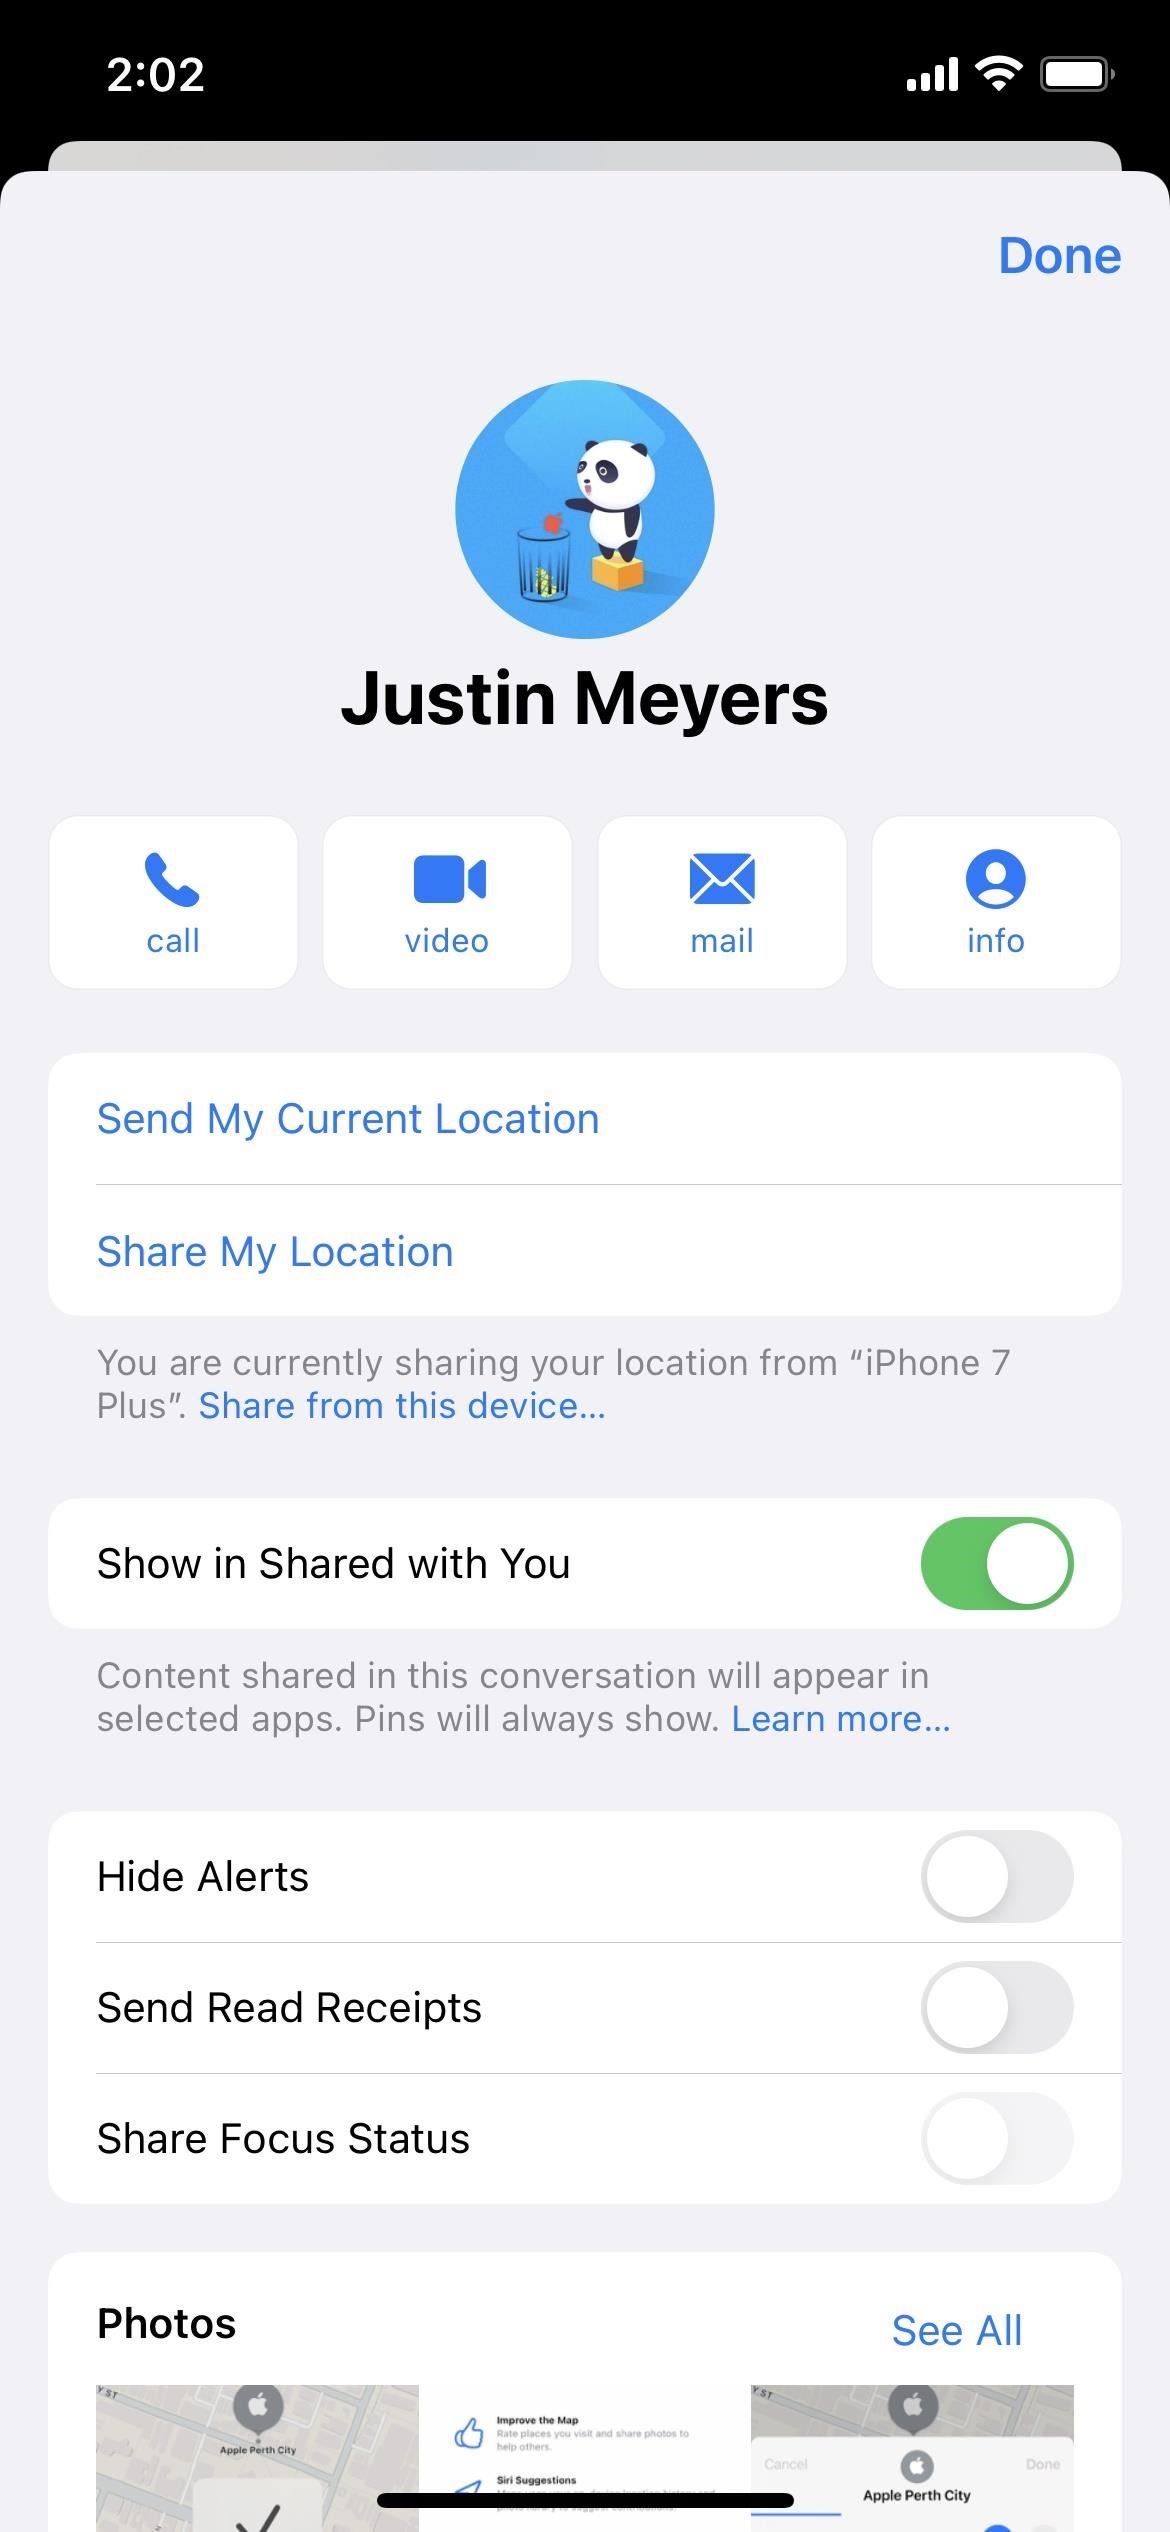 How to Hide Specific Content in iOS 15's New 'Shared with You' Sections Without Disabling the Entire Feature